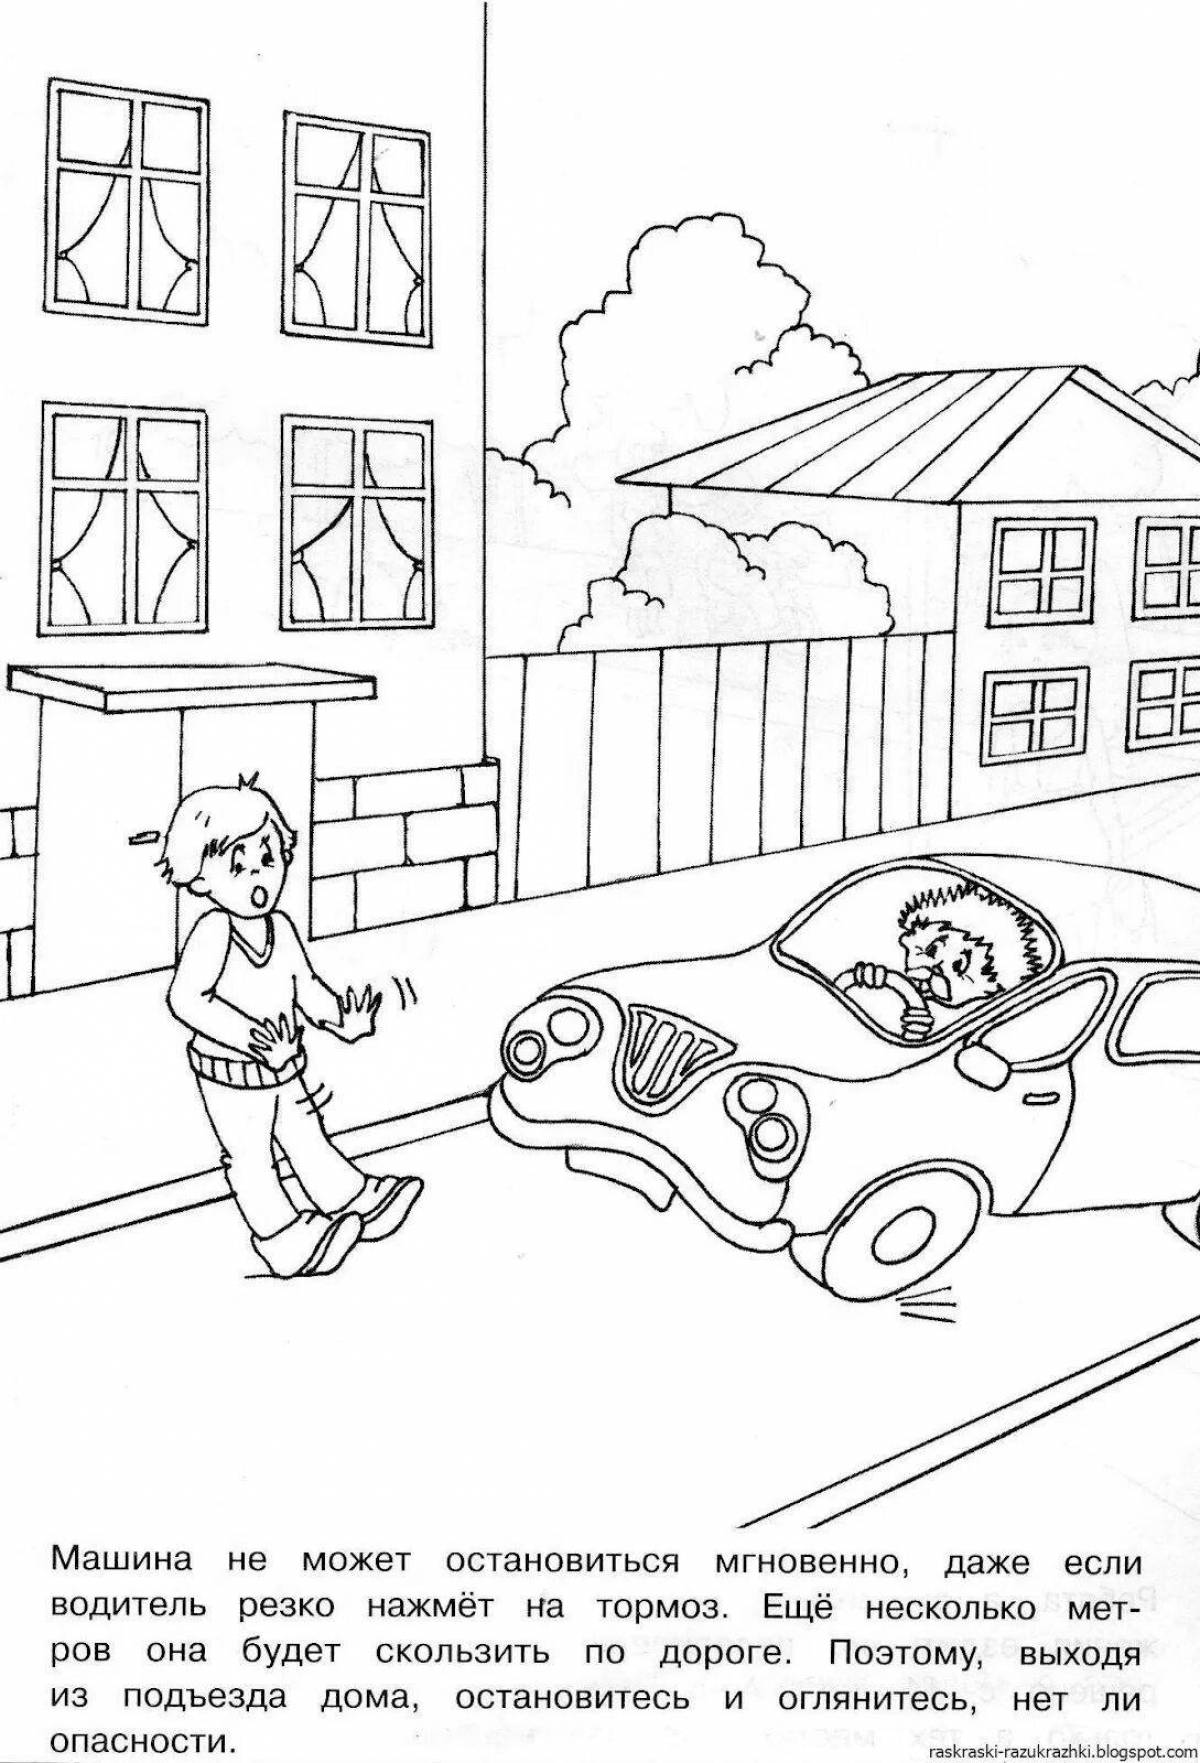 Superb road safety coloring page